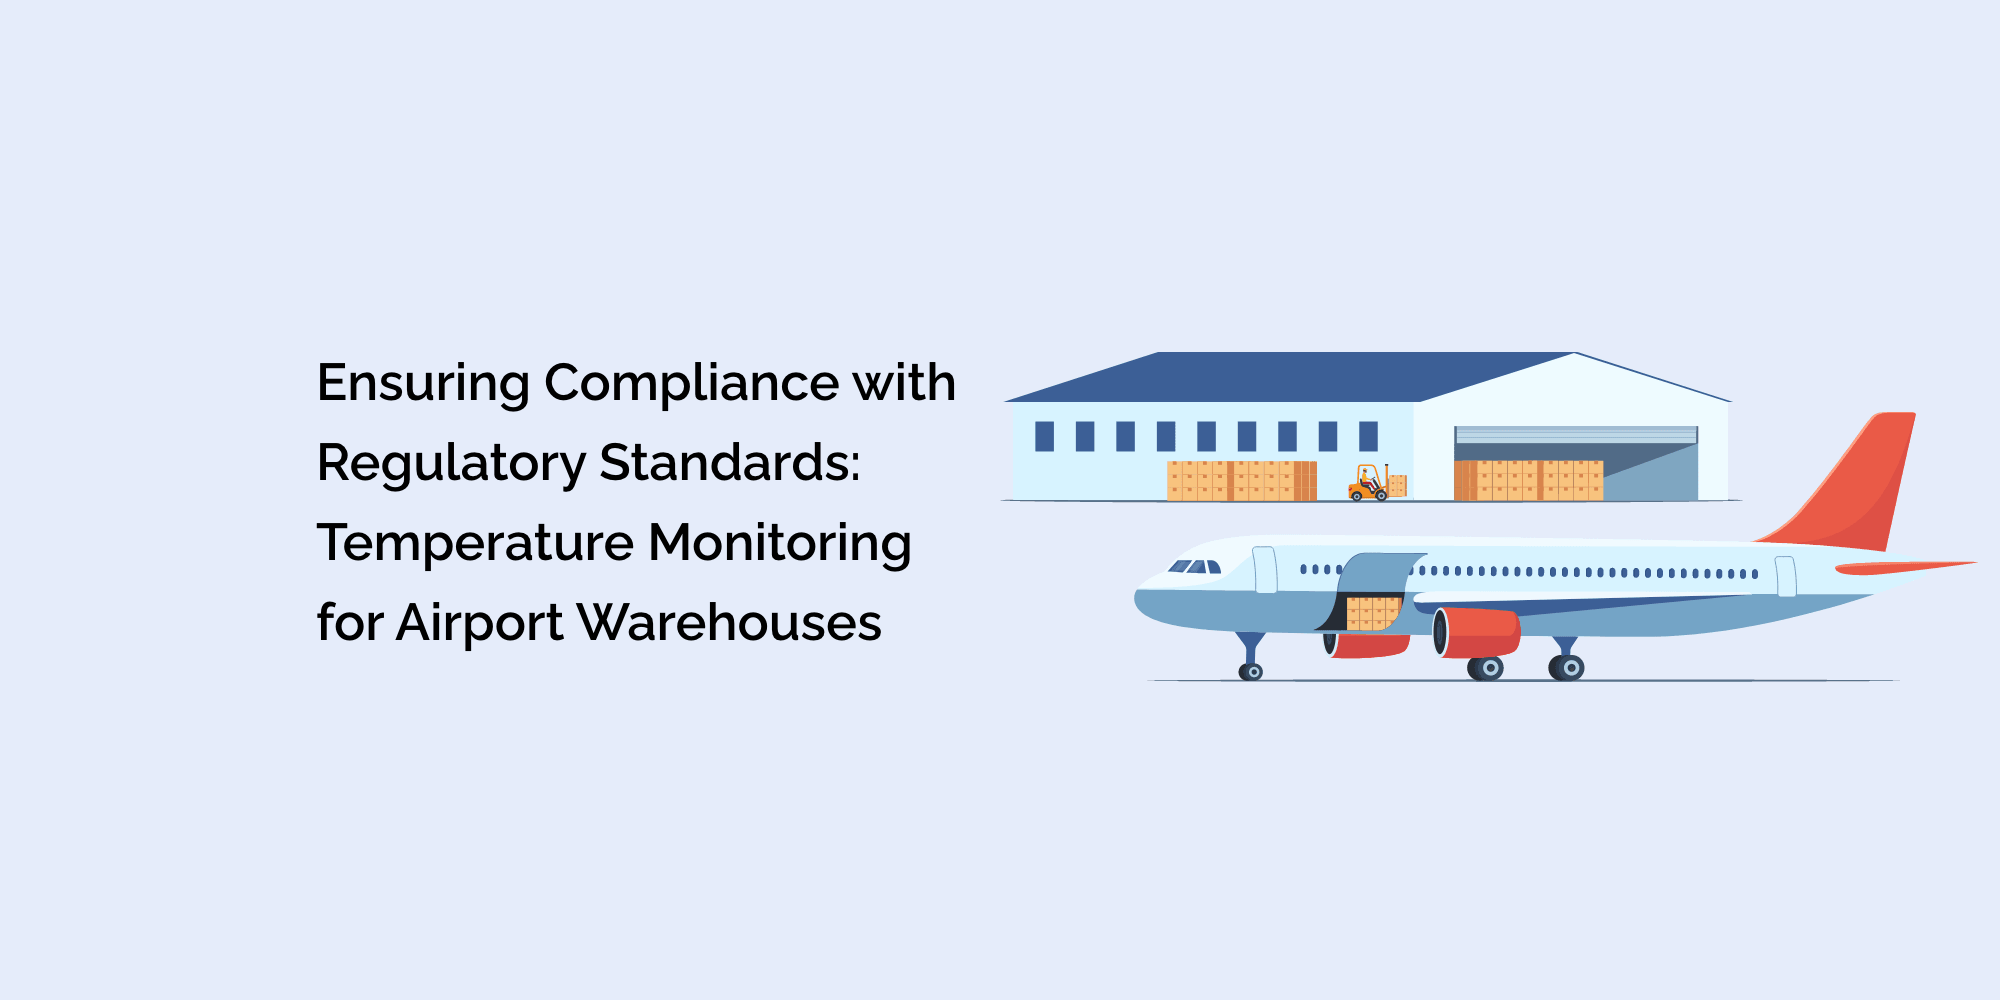 Ensuring Compliance with Regulatory Standards: Temperature Monitoring for Airport Warehouses